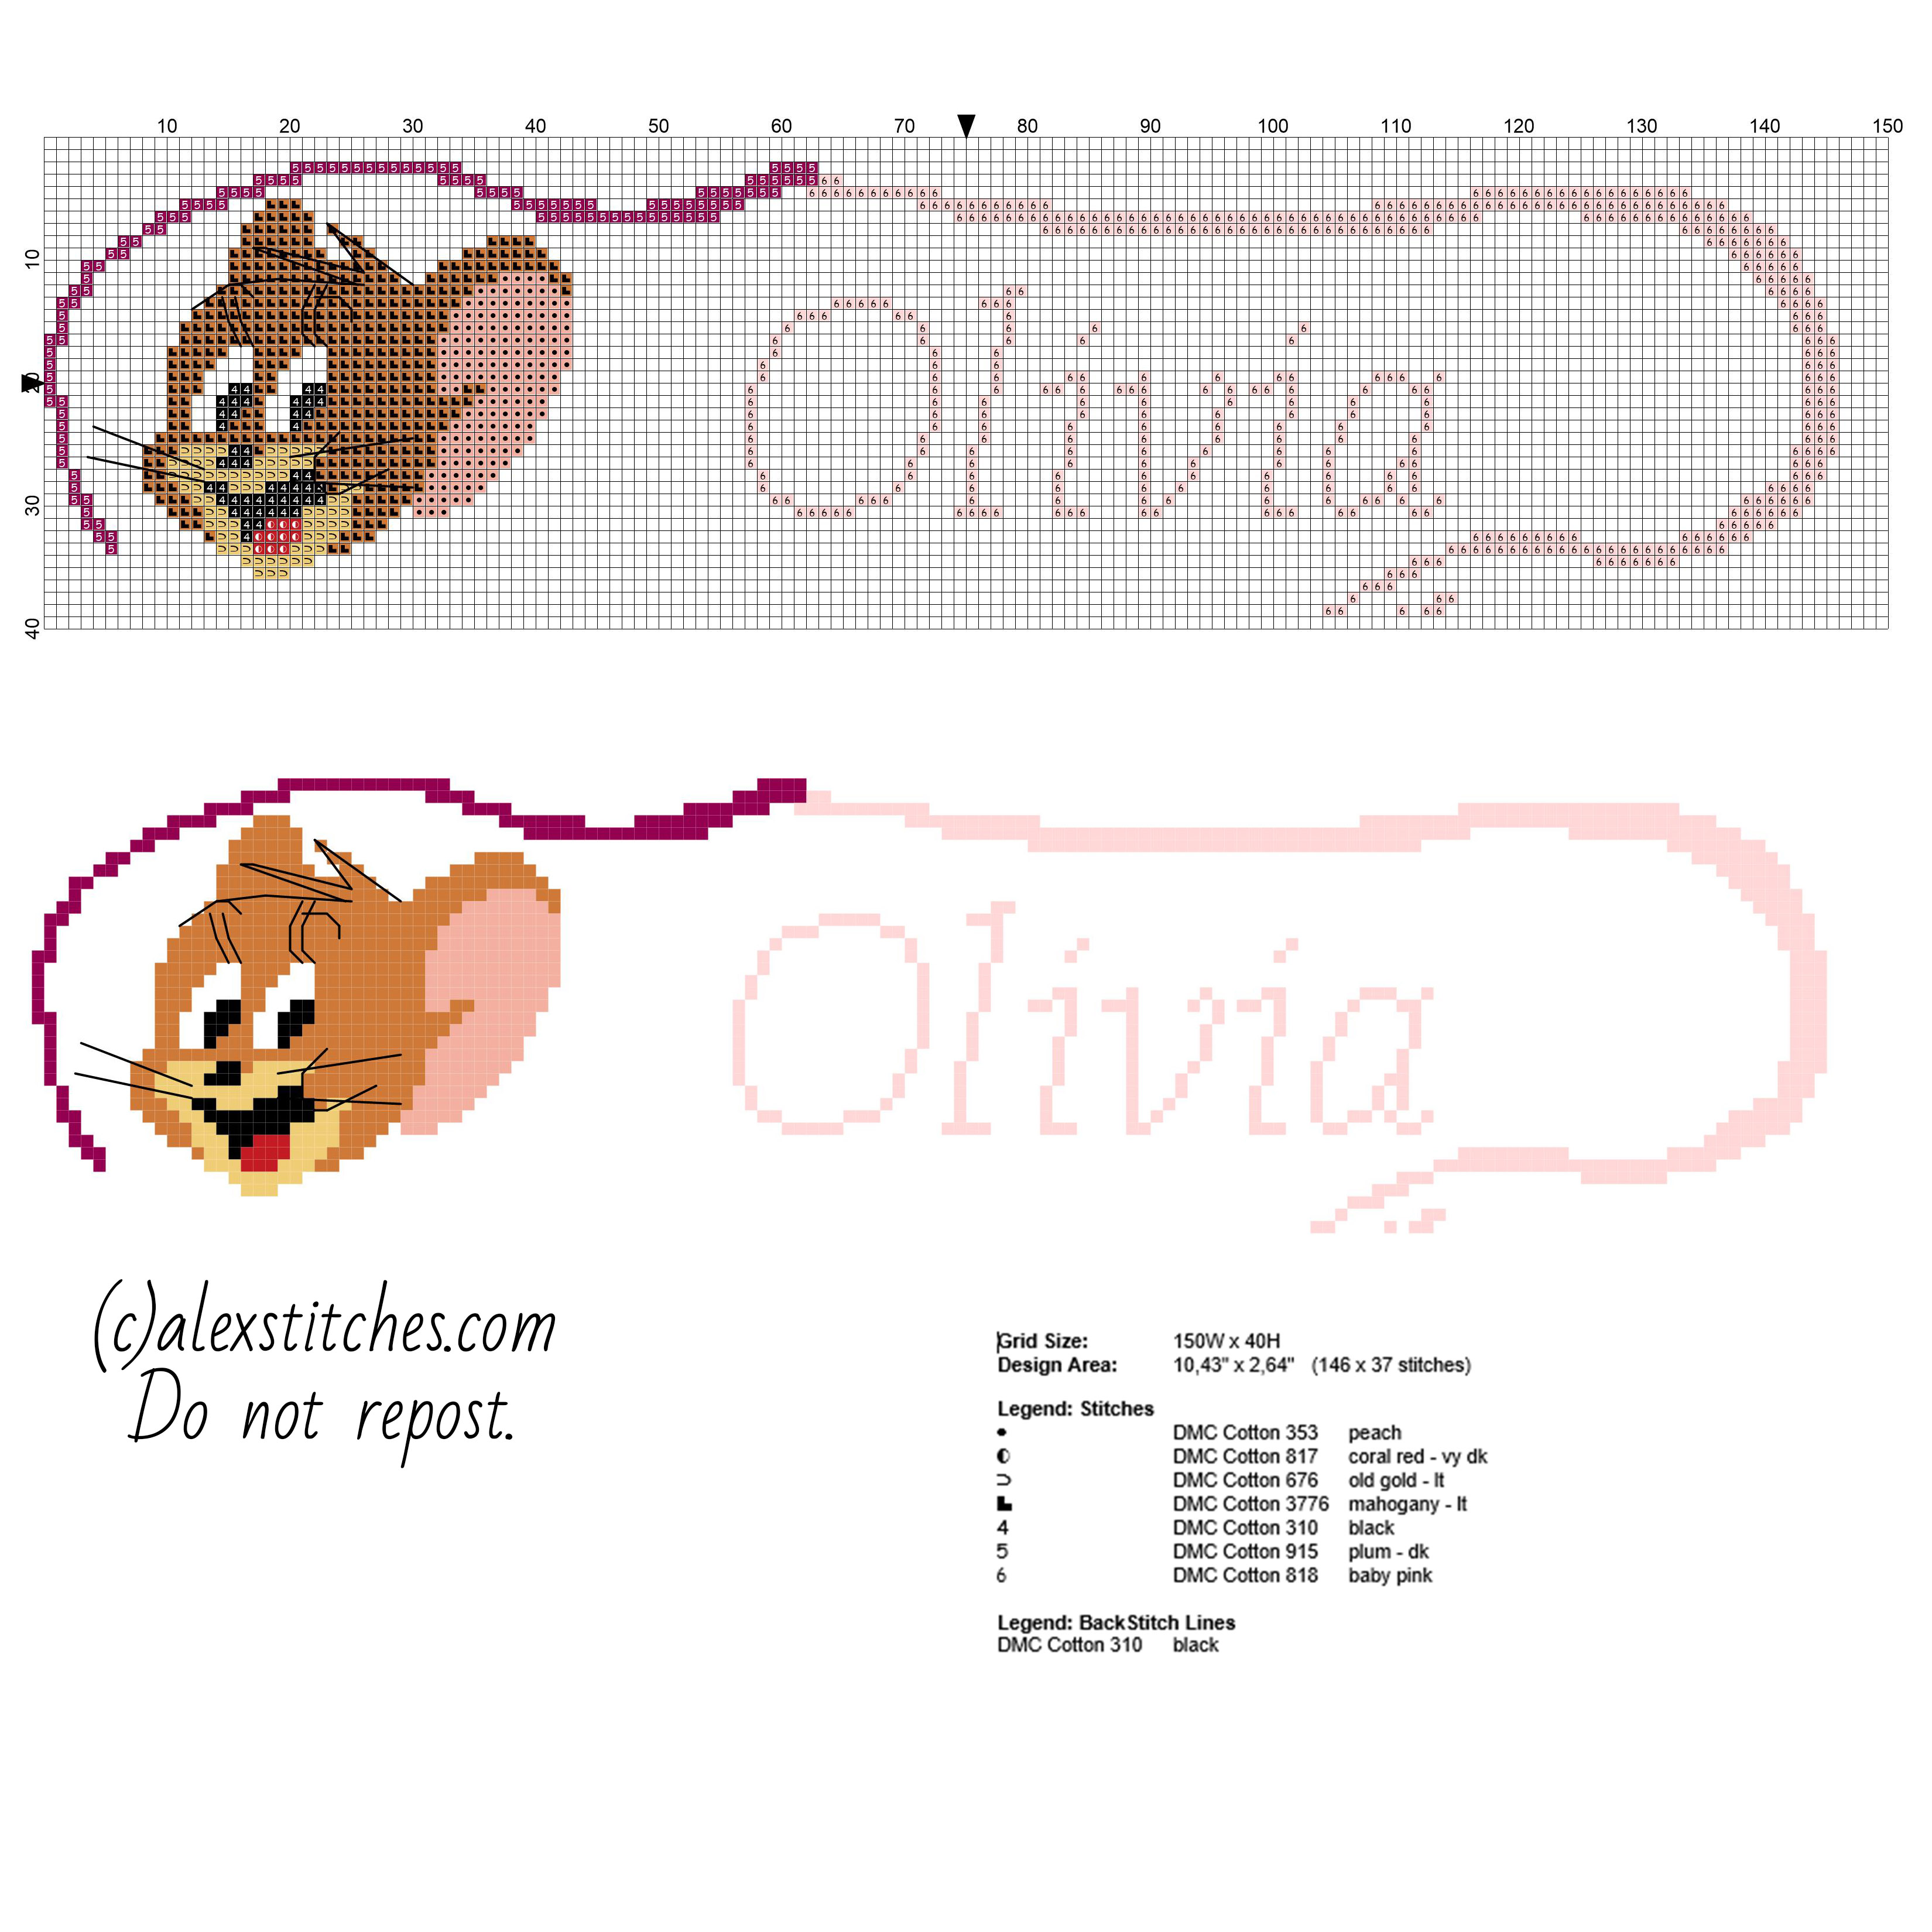 Cross stitch baby name Olivia with Jerry character from Tom and Jerry cartoon